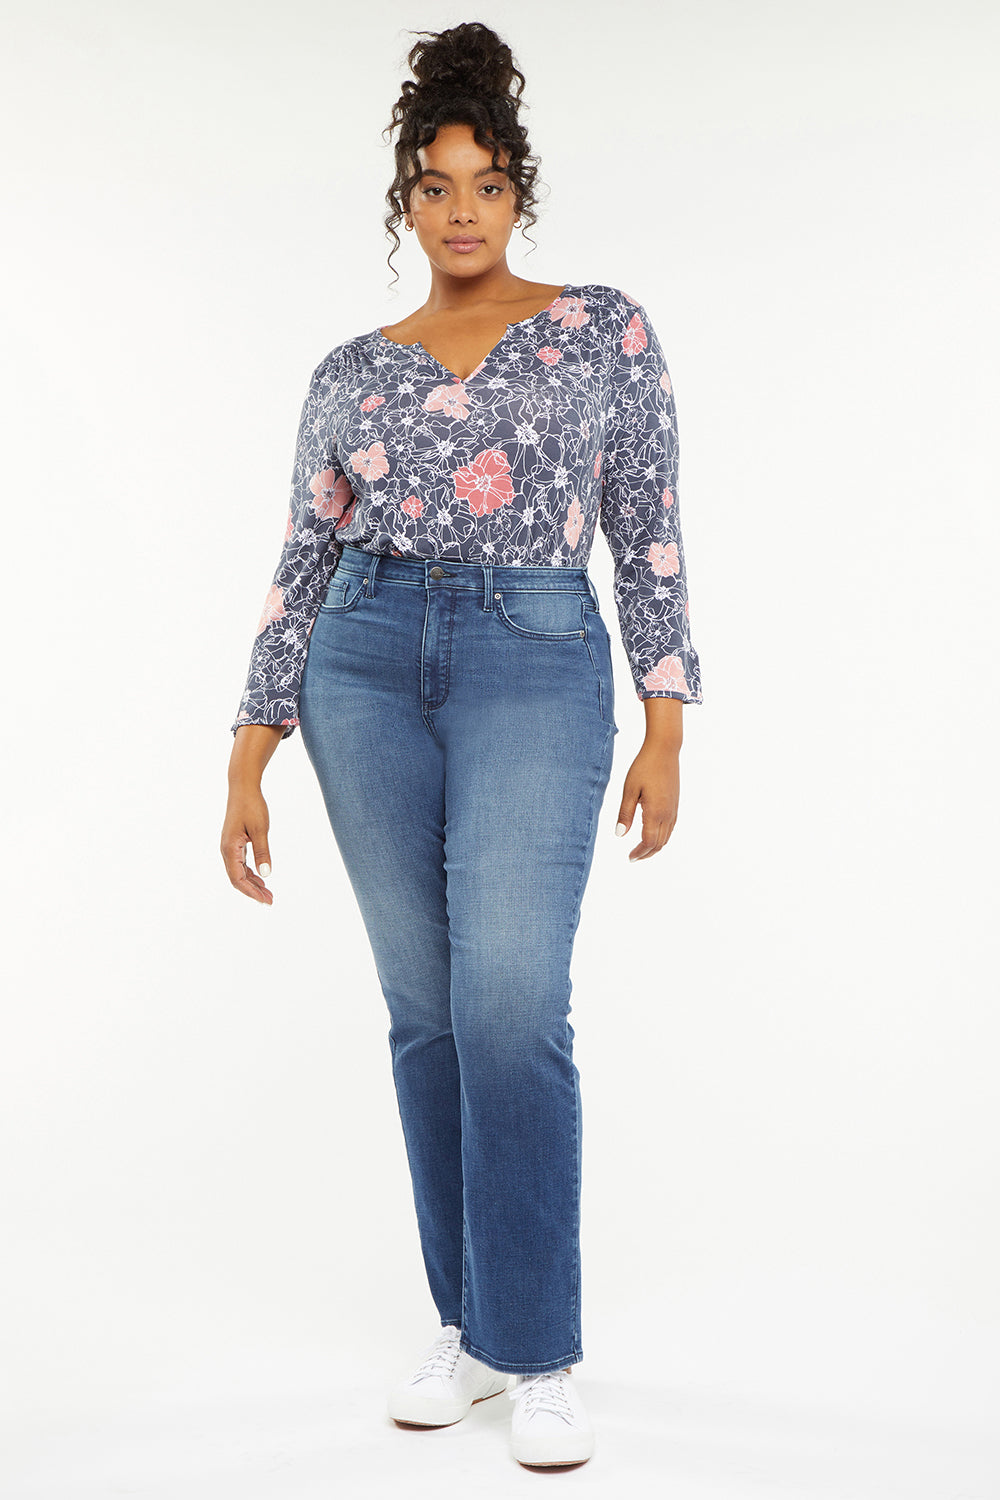 Shop NYDJ Jeans and Casual Wear at Toni Plus